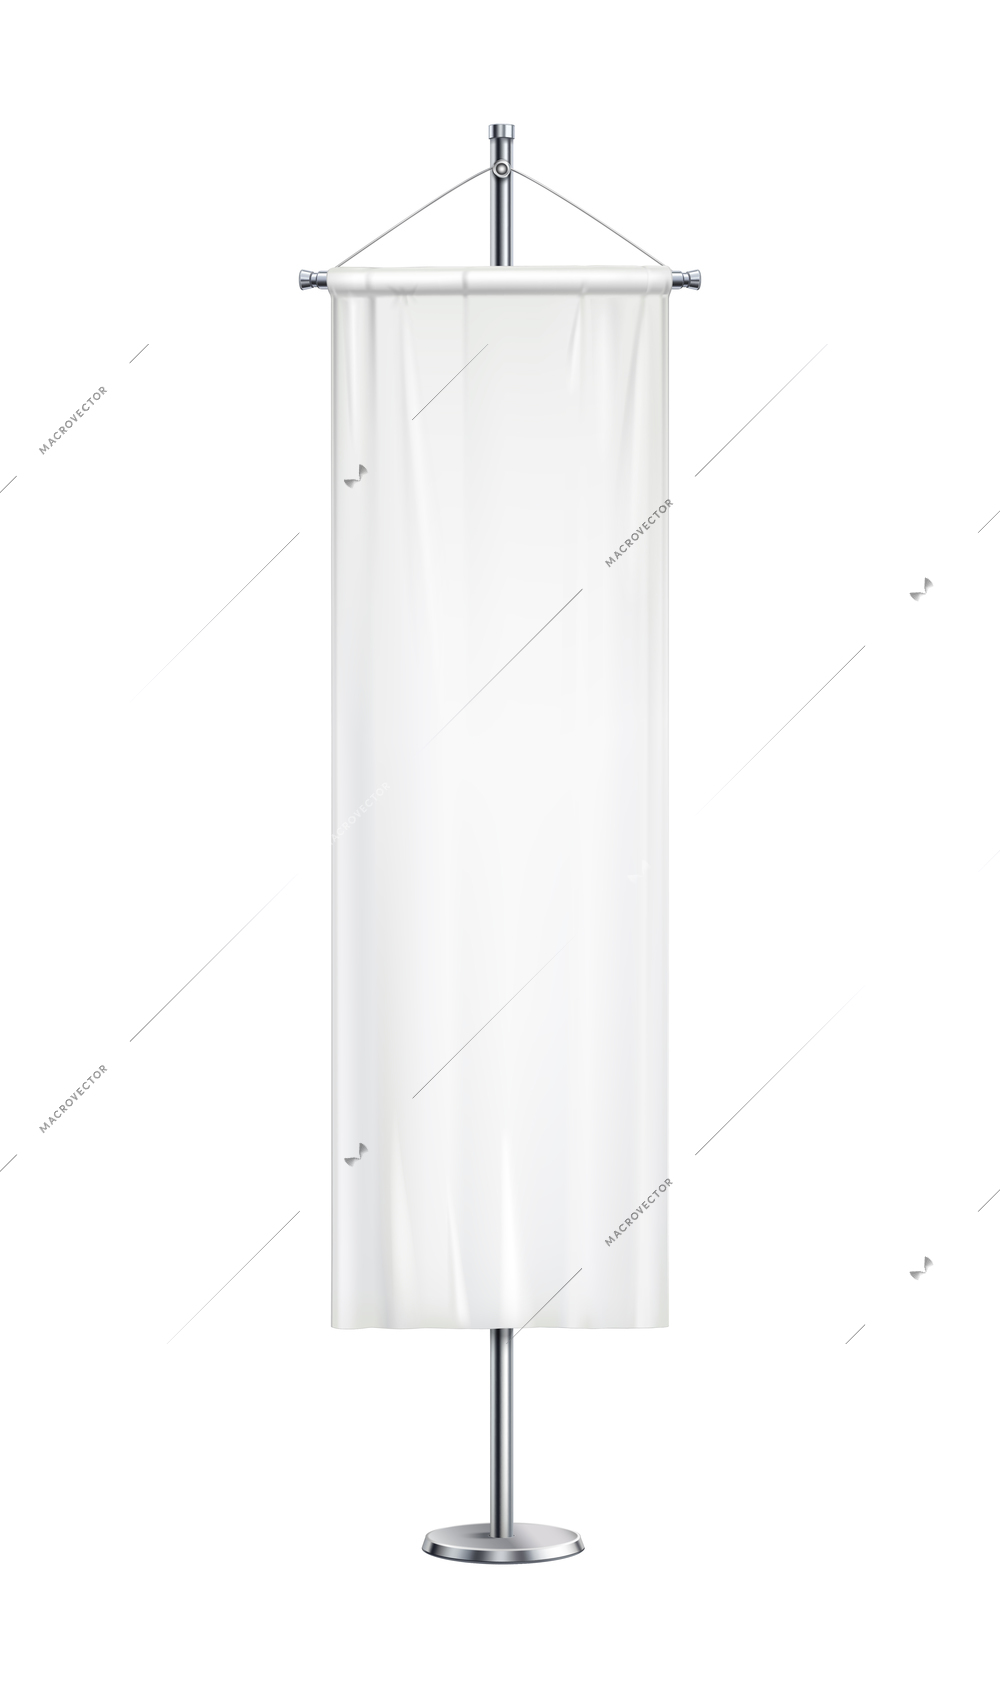 Pennant realistic composition with isolated image of long white pennon hanging on post vector illustration